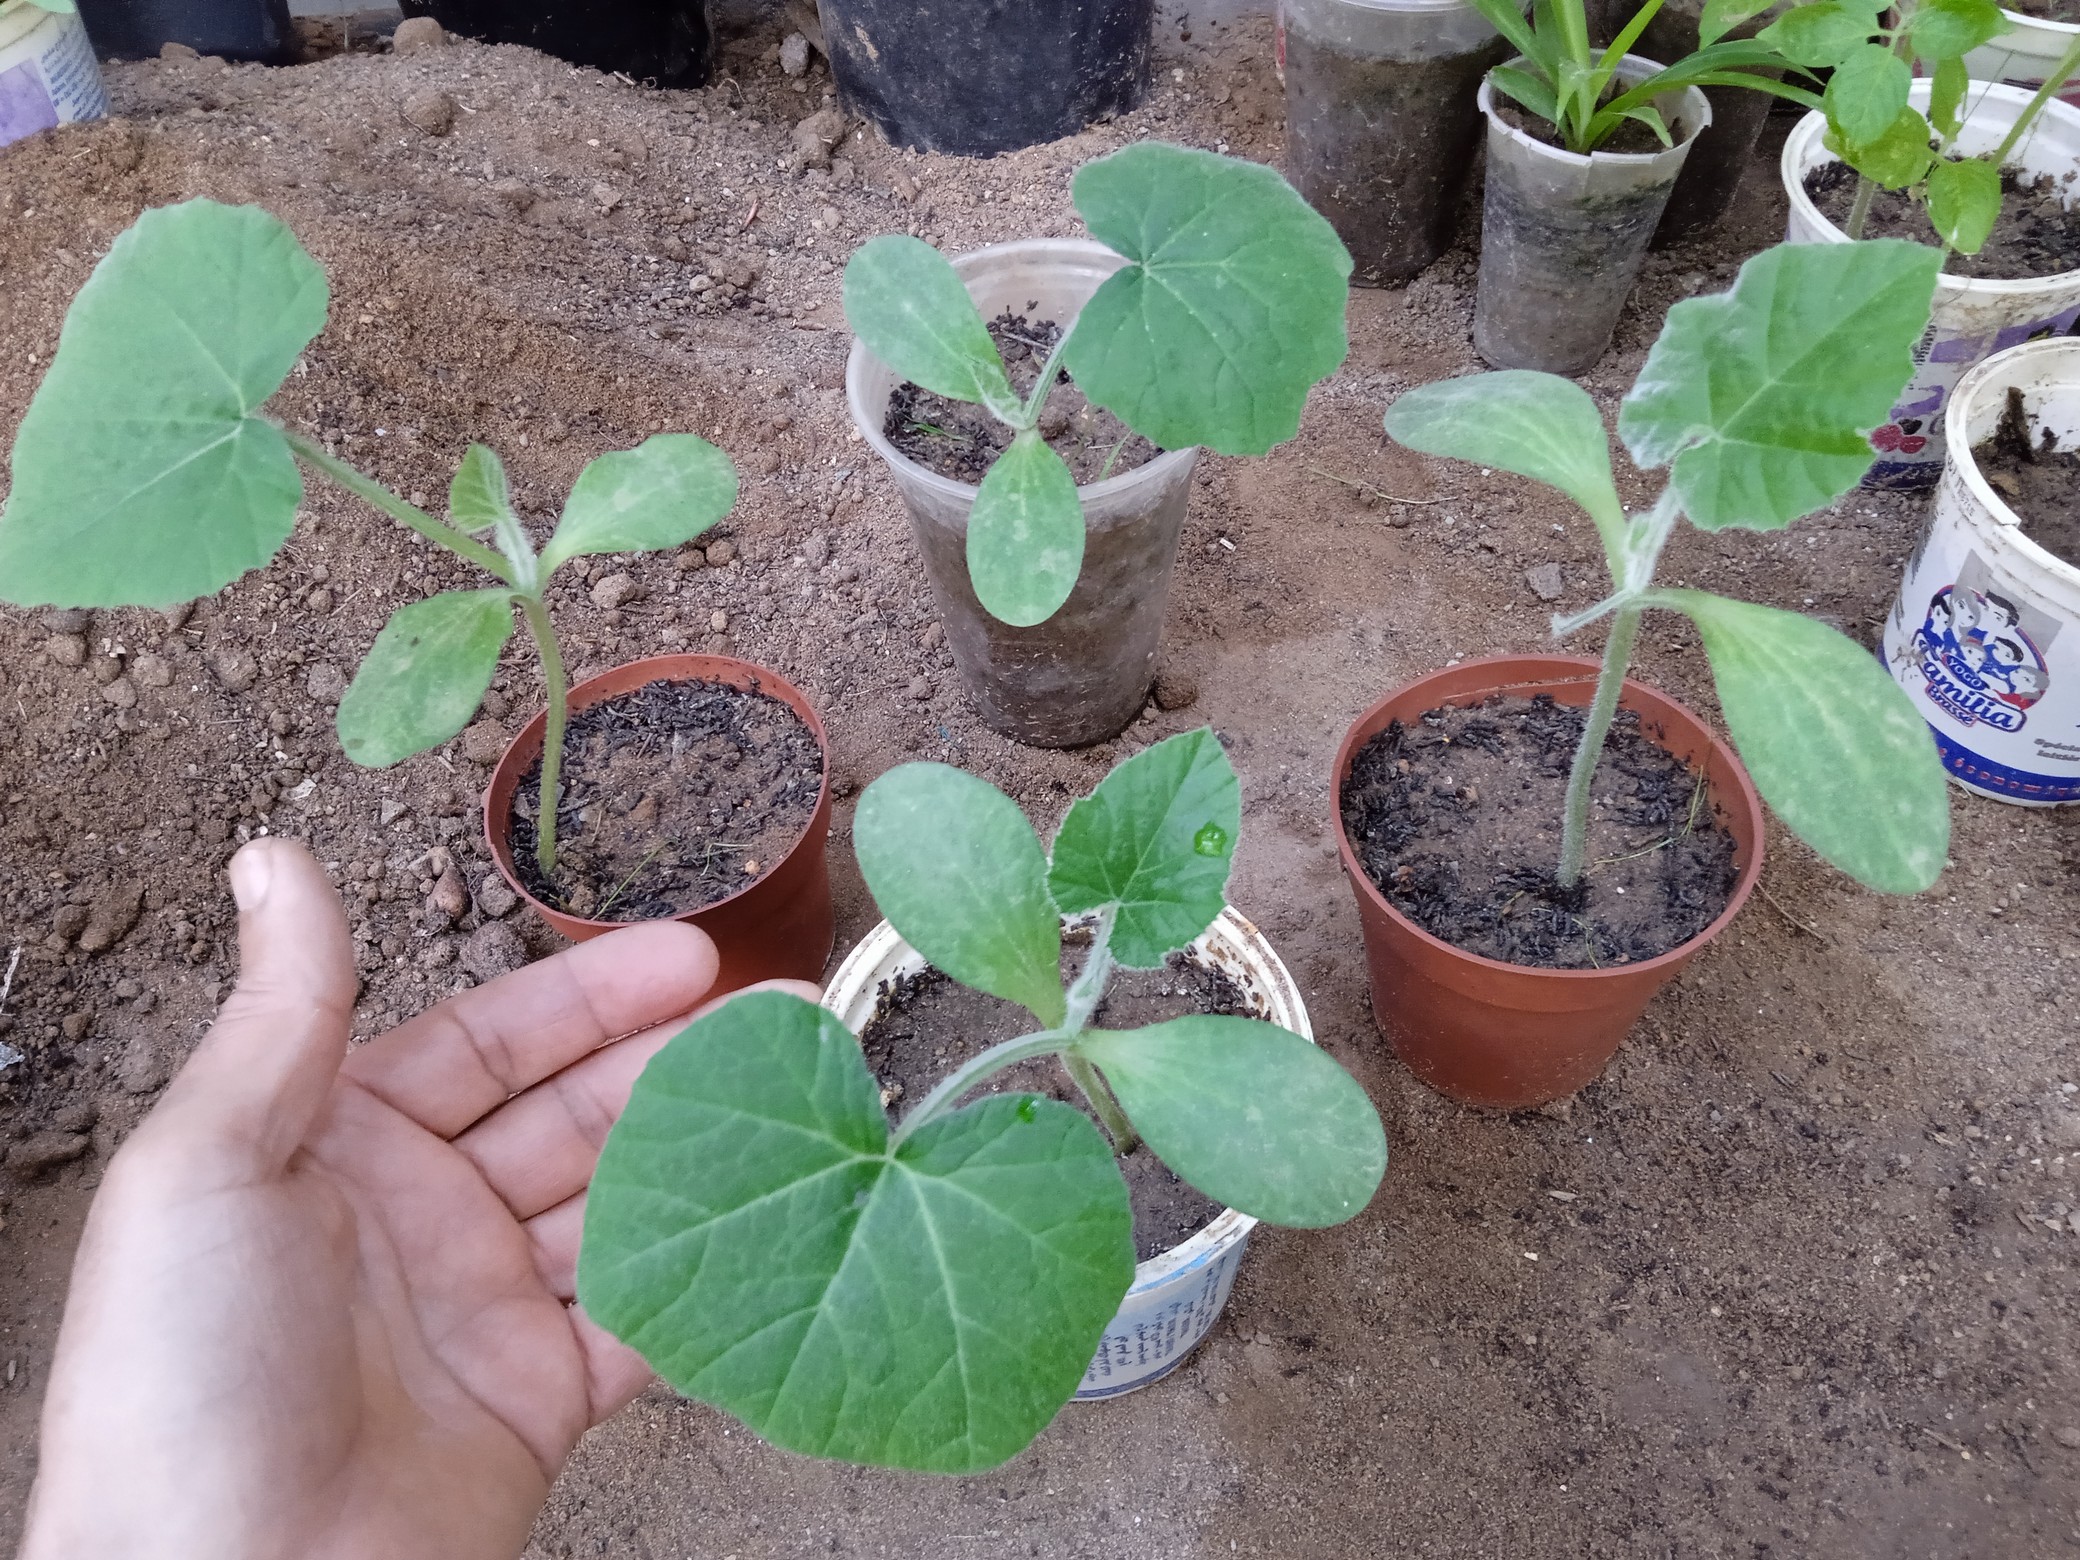 Transferring zucchini seedlings from indoor conditions to the outdoor environment requires careful planning and acclimatization to prevent shock and ensure successful growth.